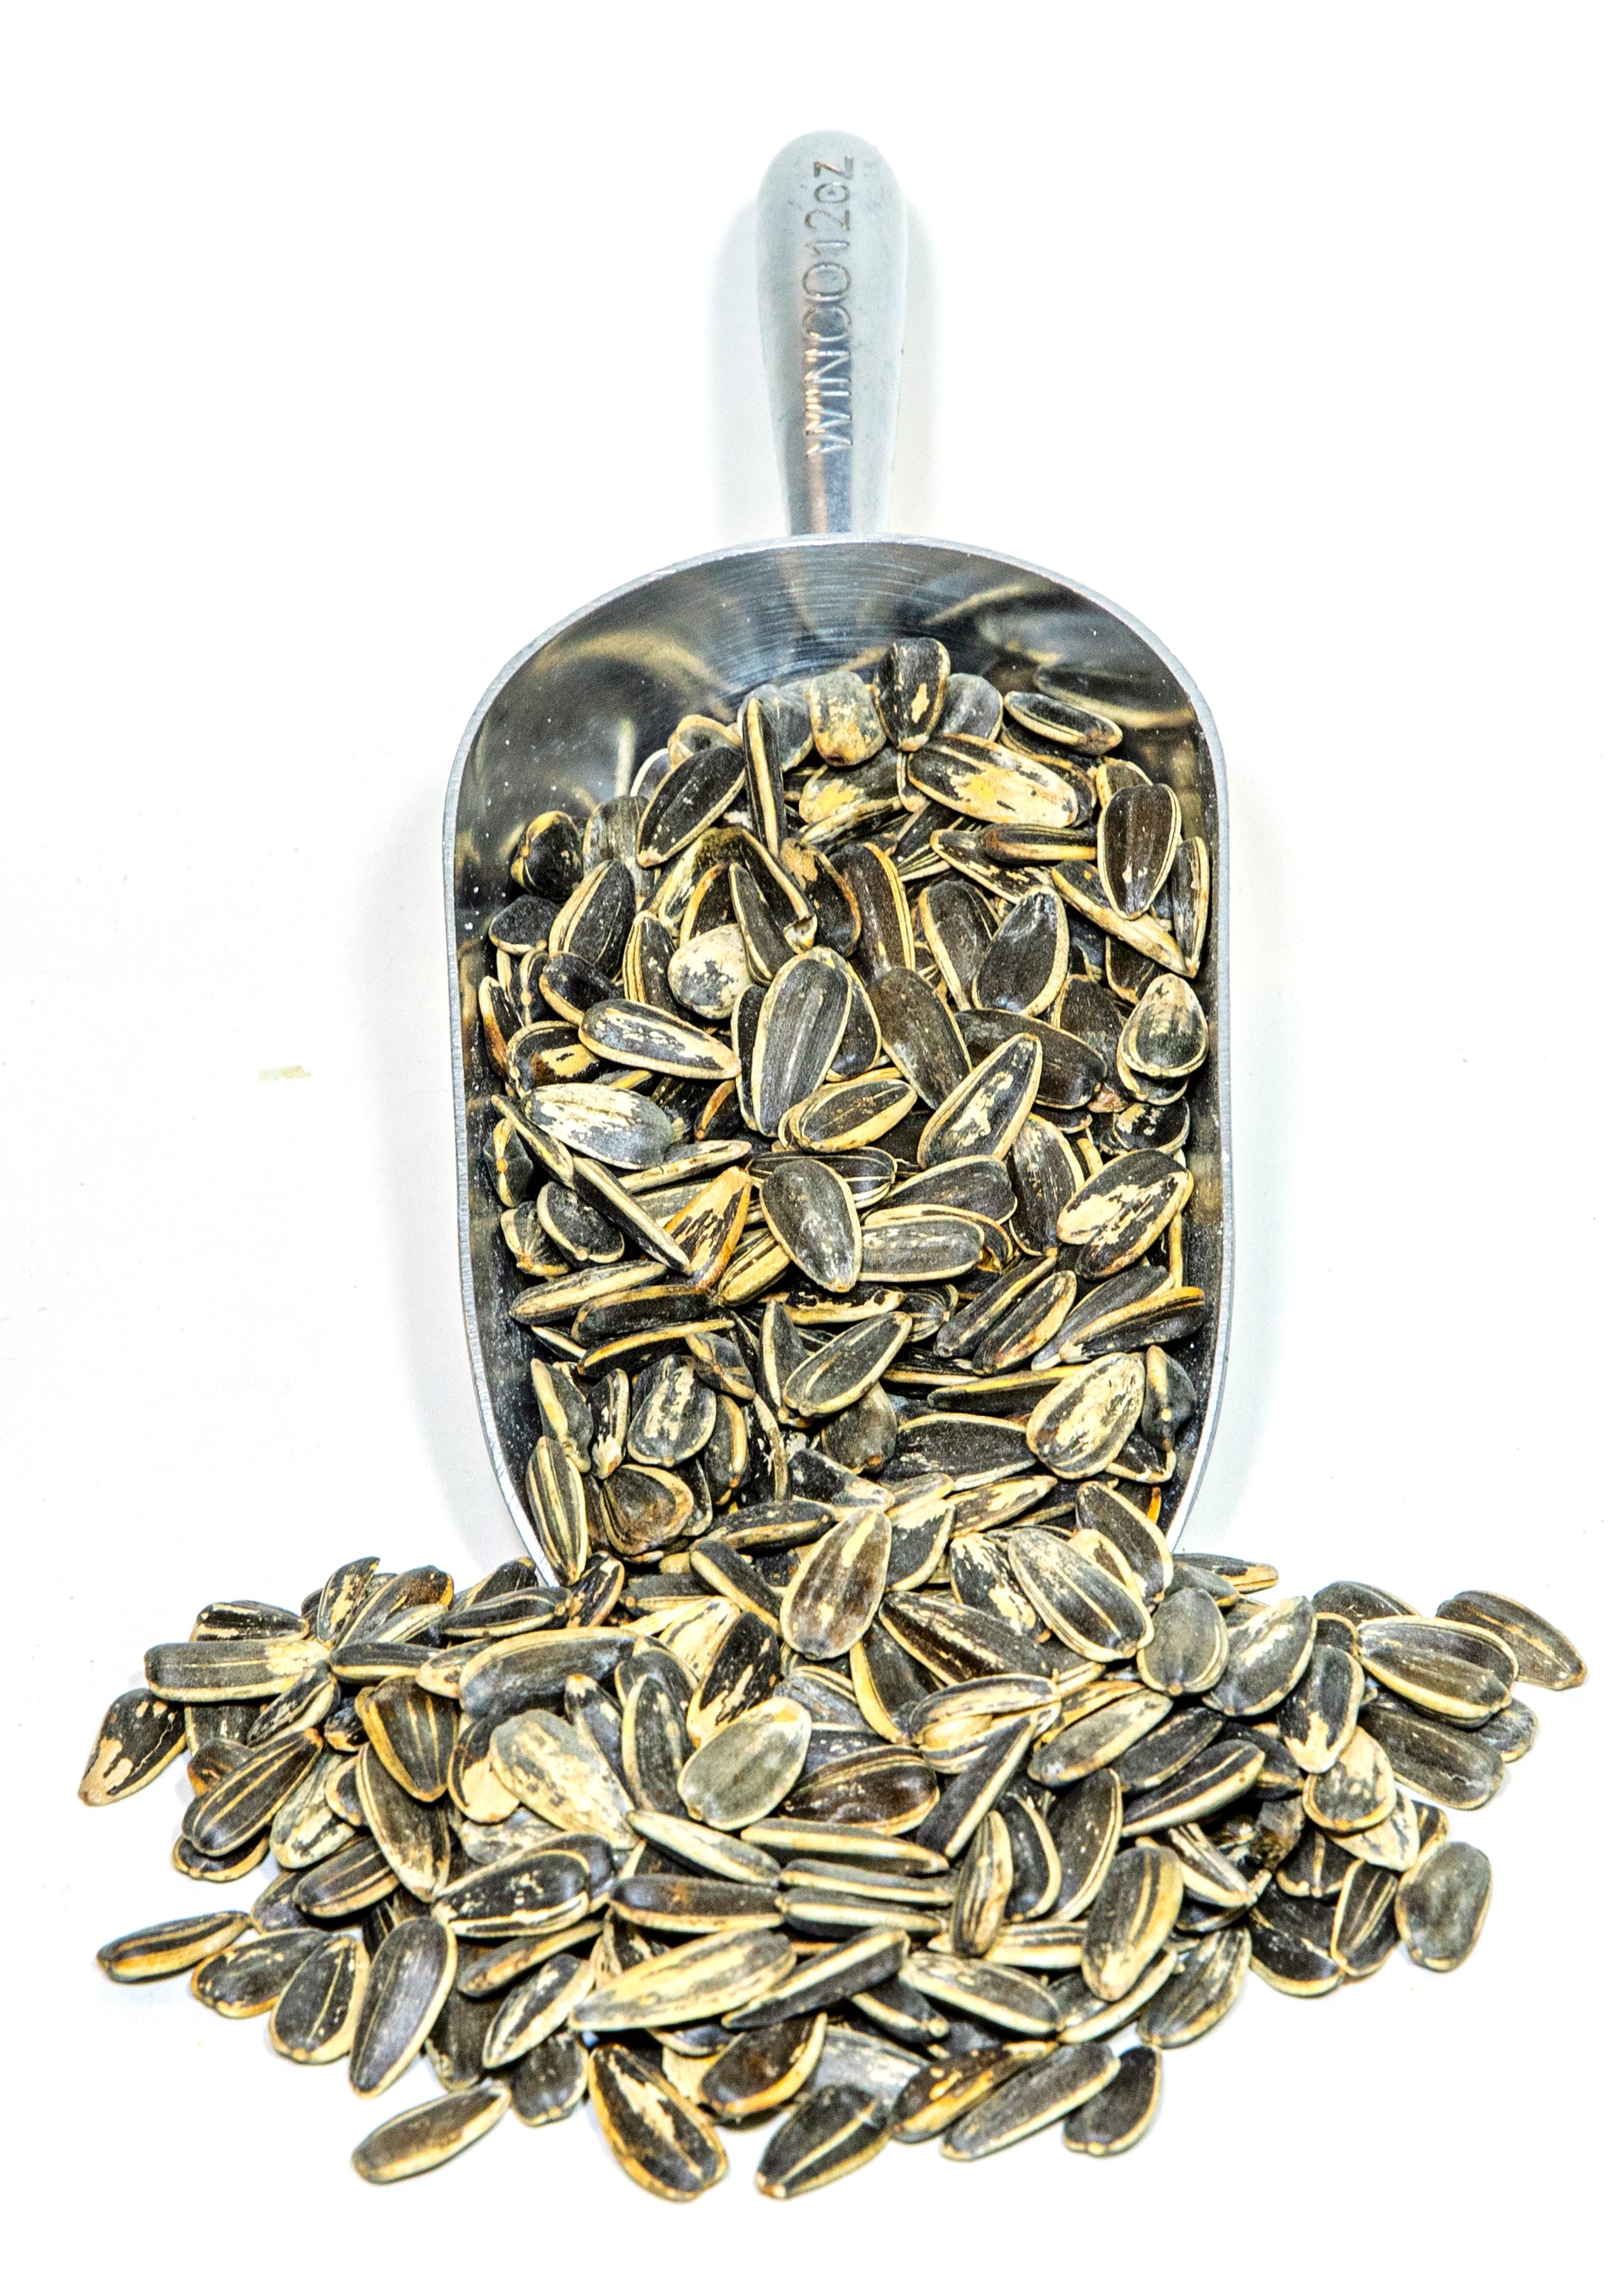 Roasted and Salted Sunflower Seeds in the Shell